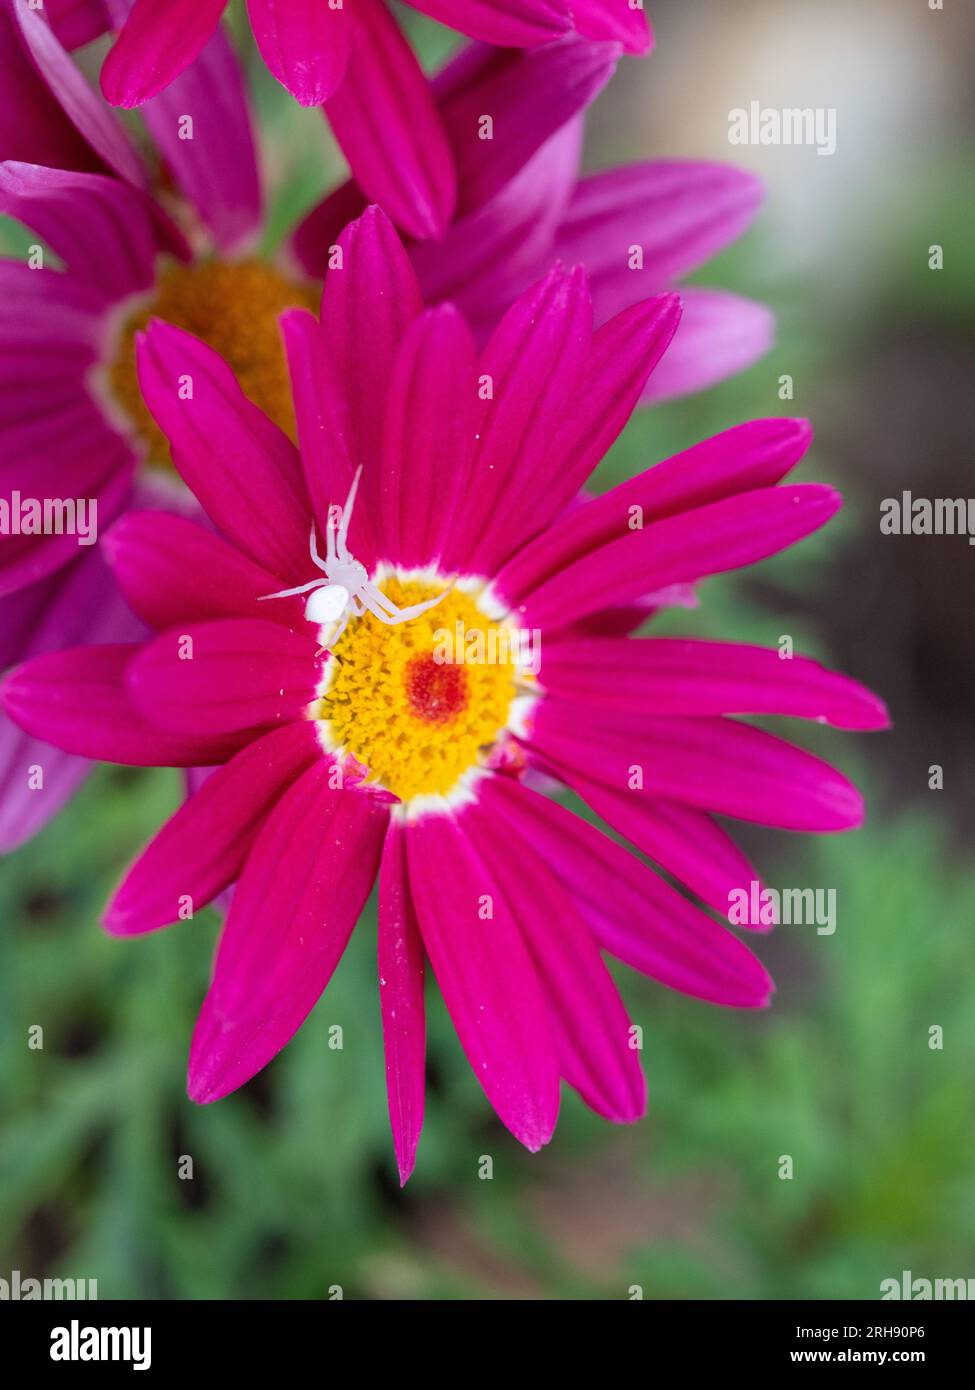 Tiny white Crab Spider standing out on a vividly coloured dark crimson pink Federation daisy flower pet, trying to blend in with the white centre ring Stock Photo